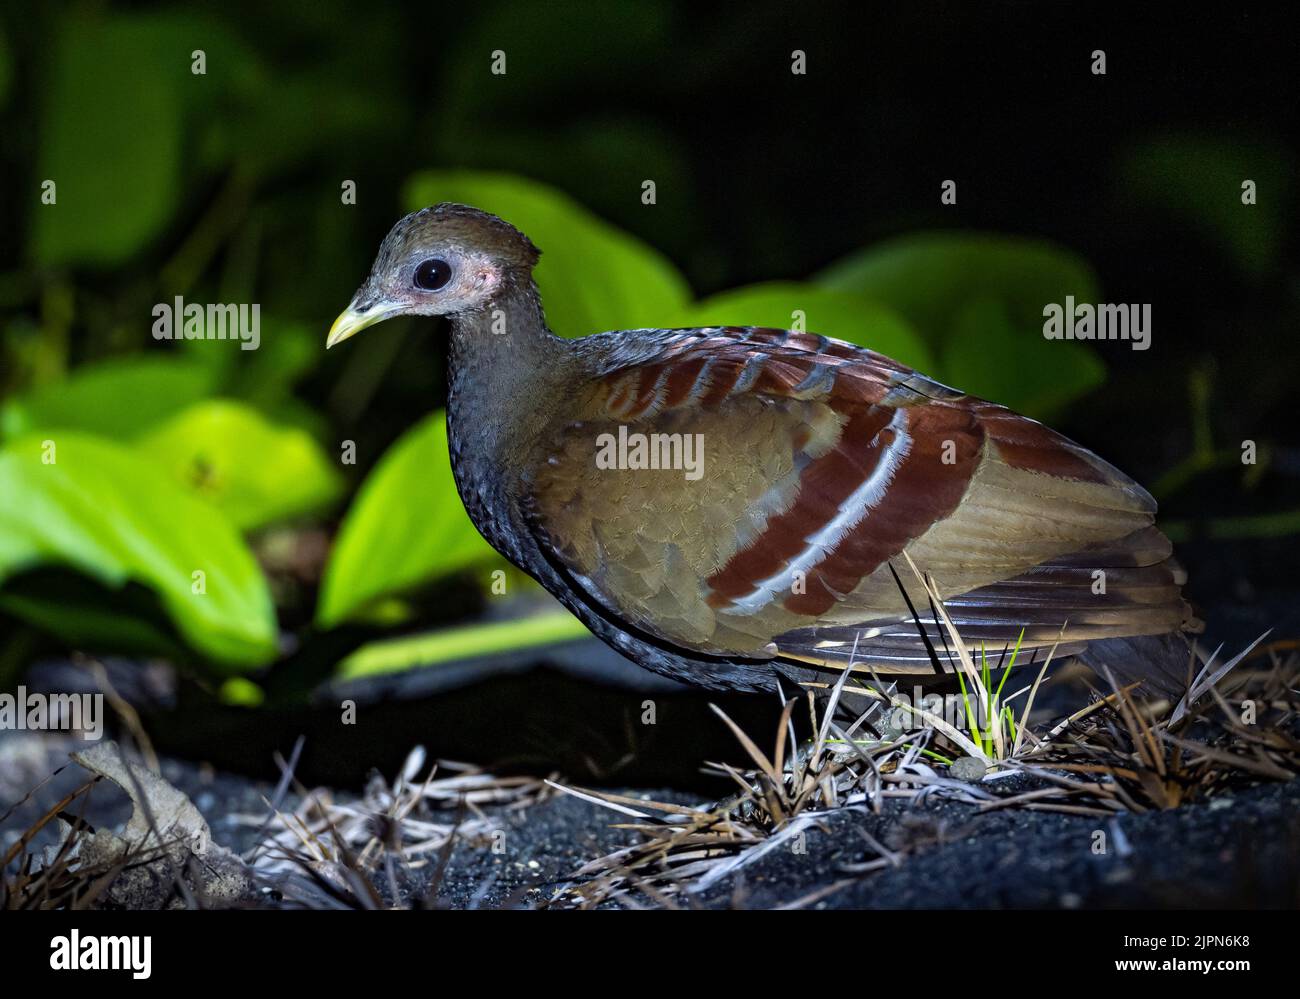 An endemic Moluccan Scrubfowl (Eulipoa wallacei) roost on a beach at night in the wild. Sulawesi, Indonesia. Stock Photo